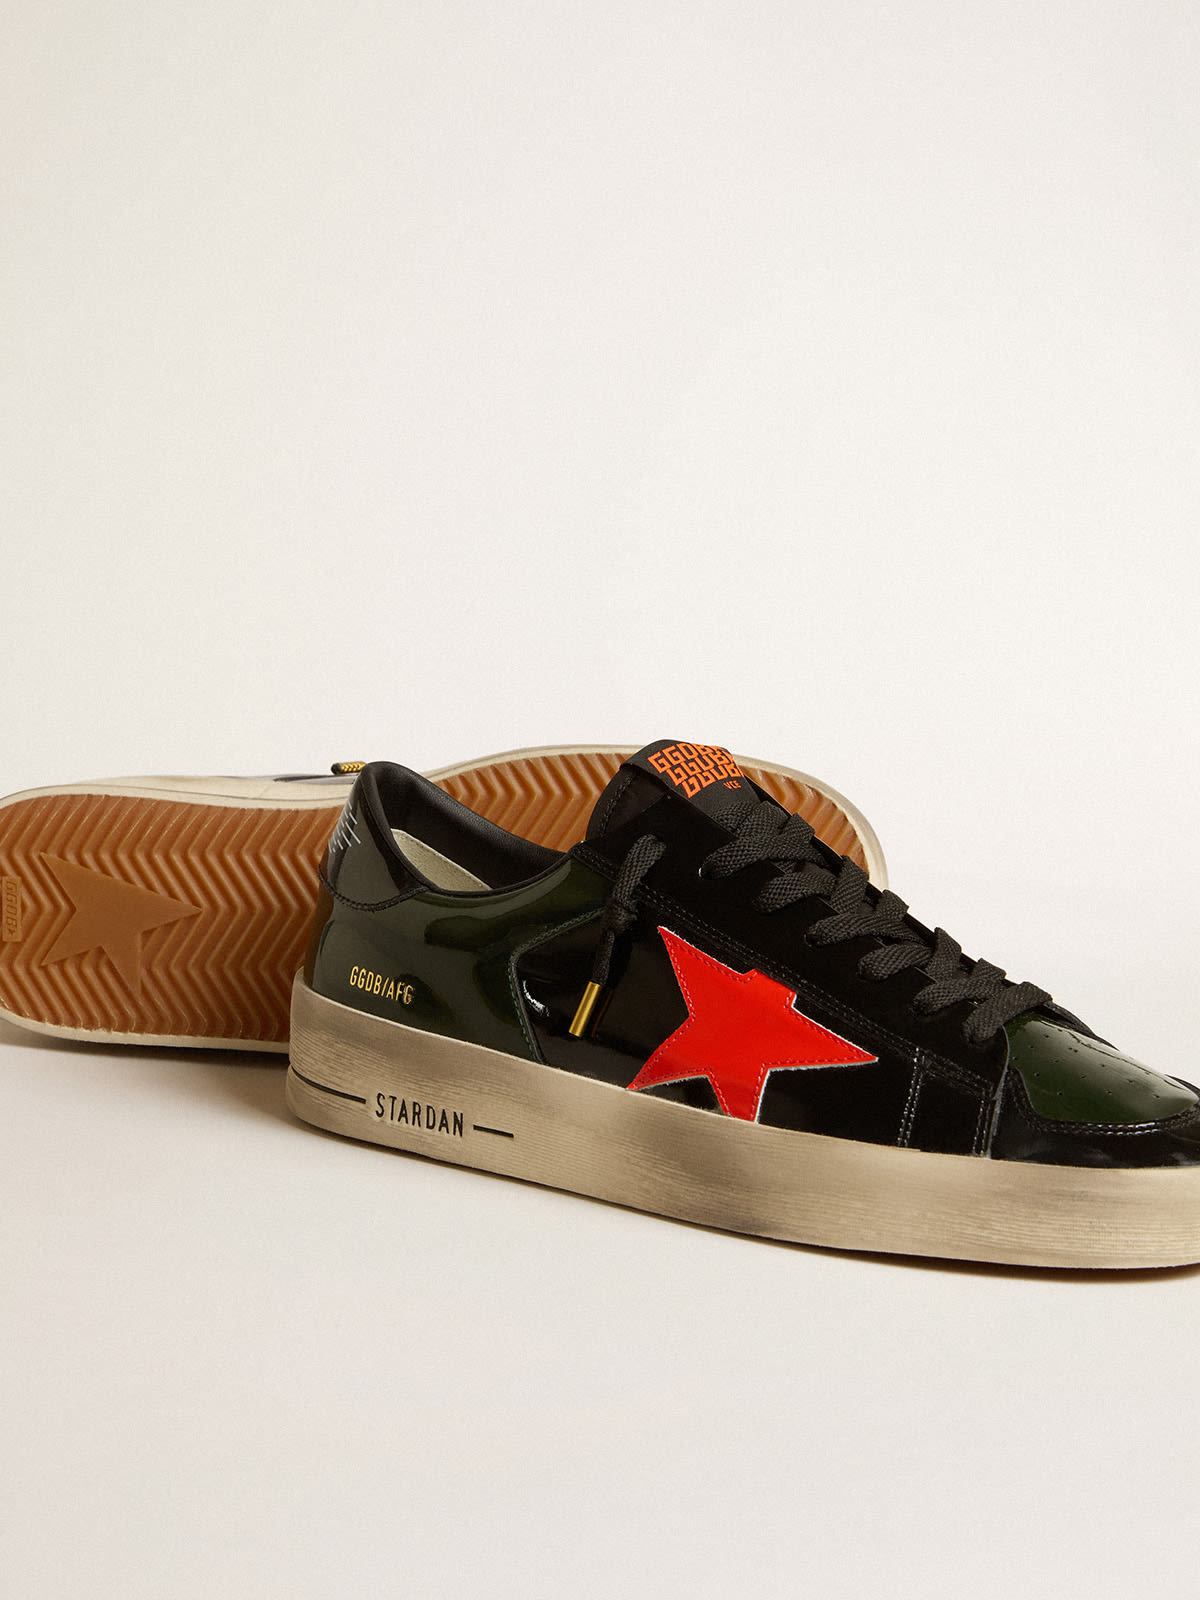 Golden Goose - Men's Stardan in black and green patent leather with orange star in 